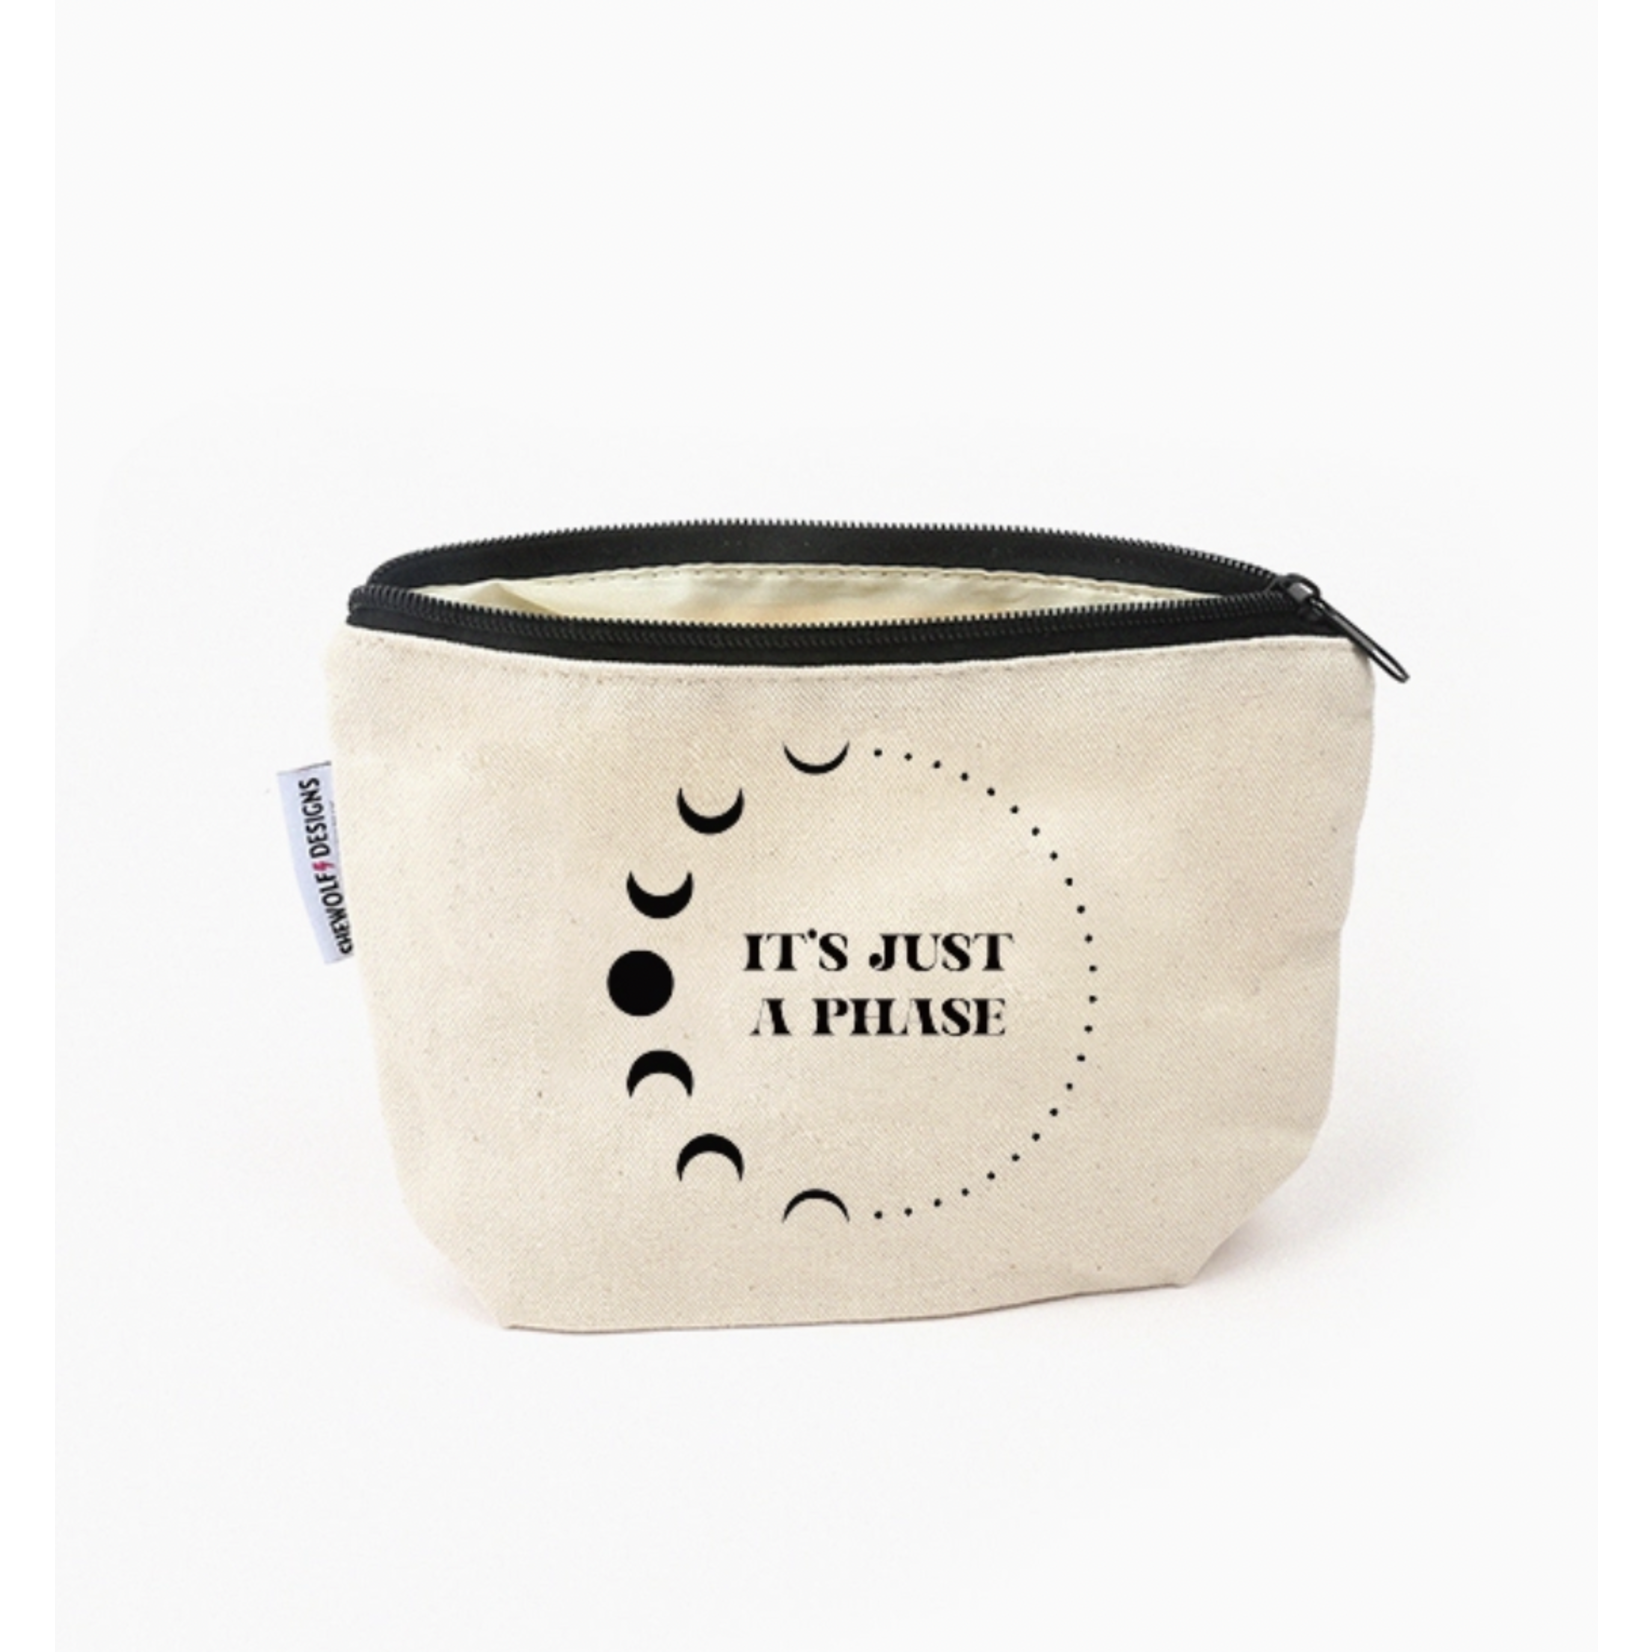 SheWolf It's Just a Phase Moon Makeup Pouch